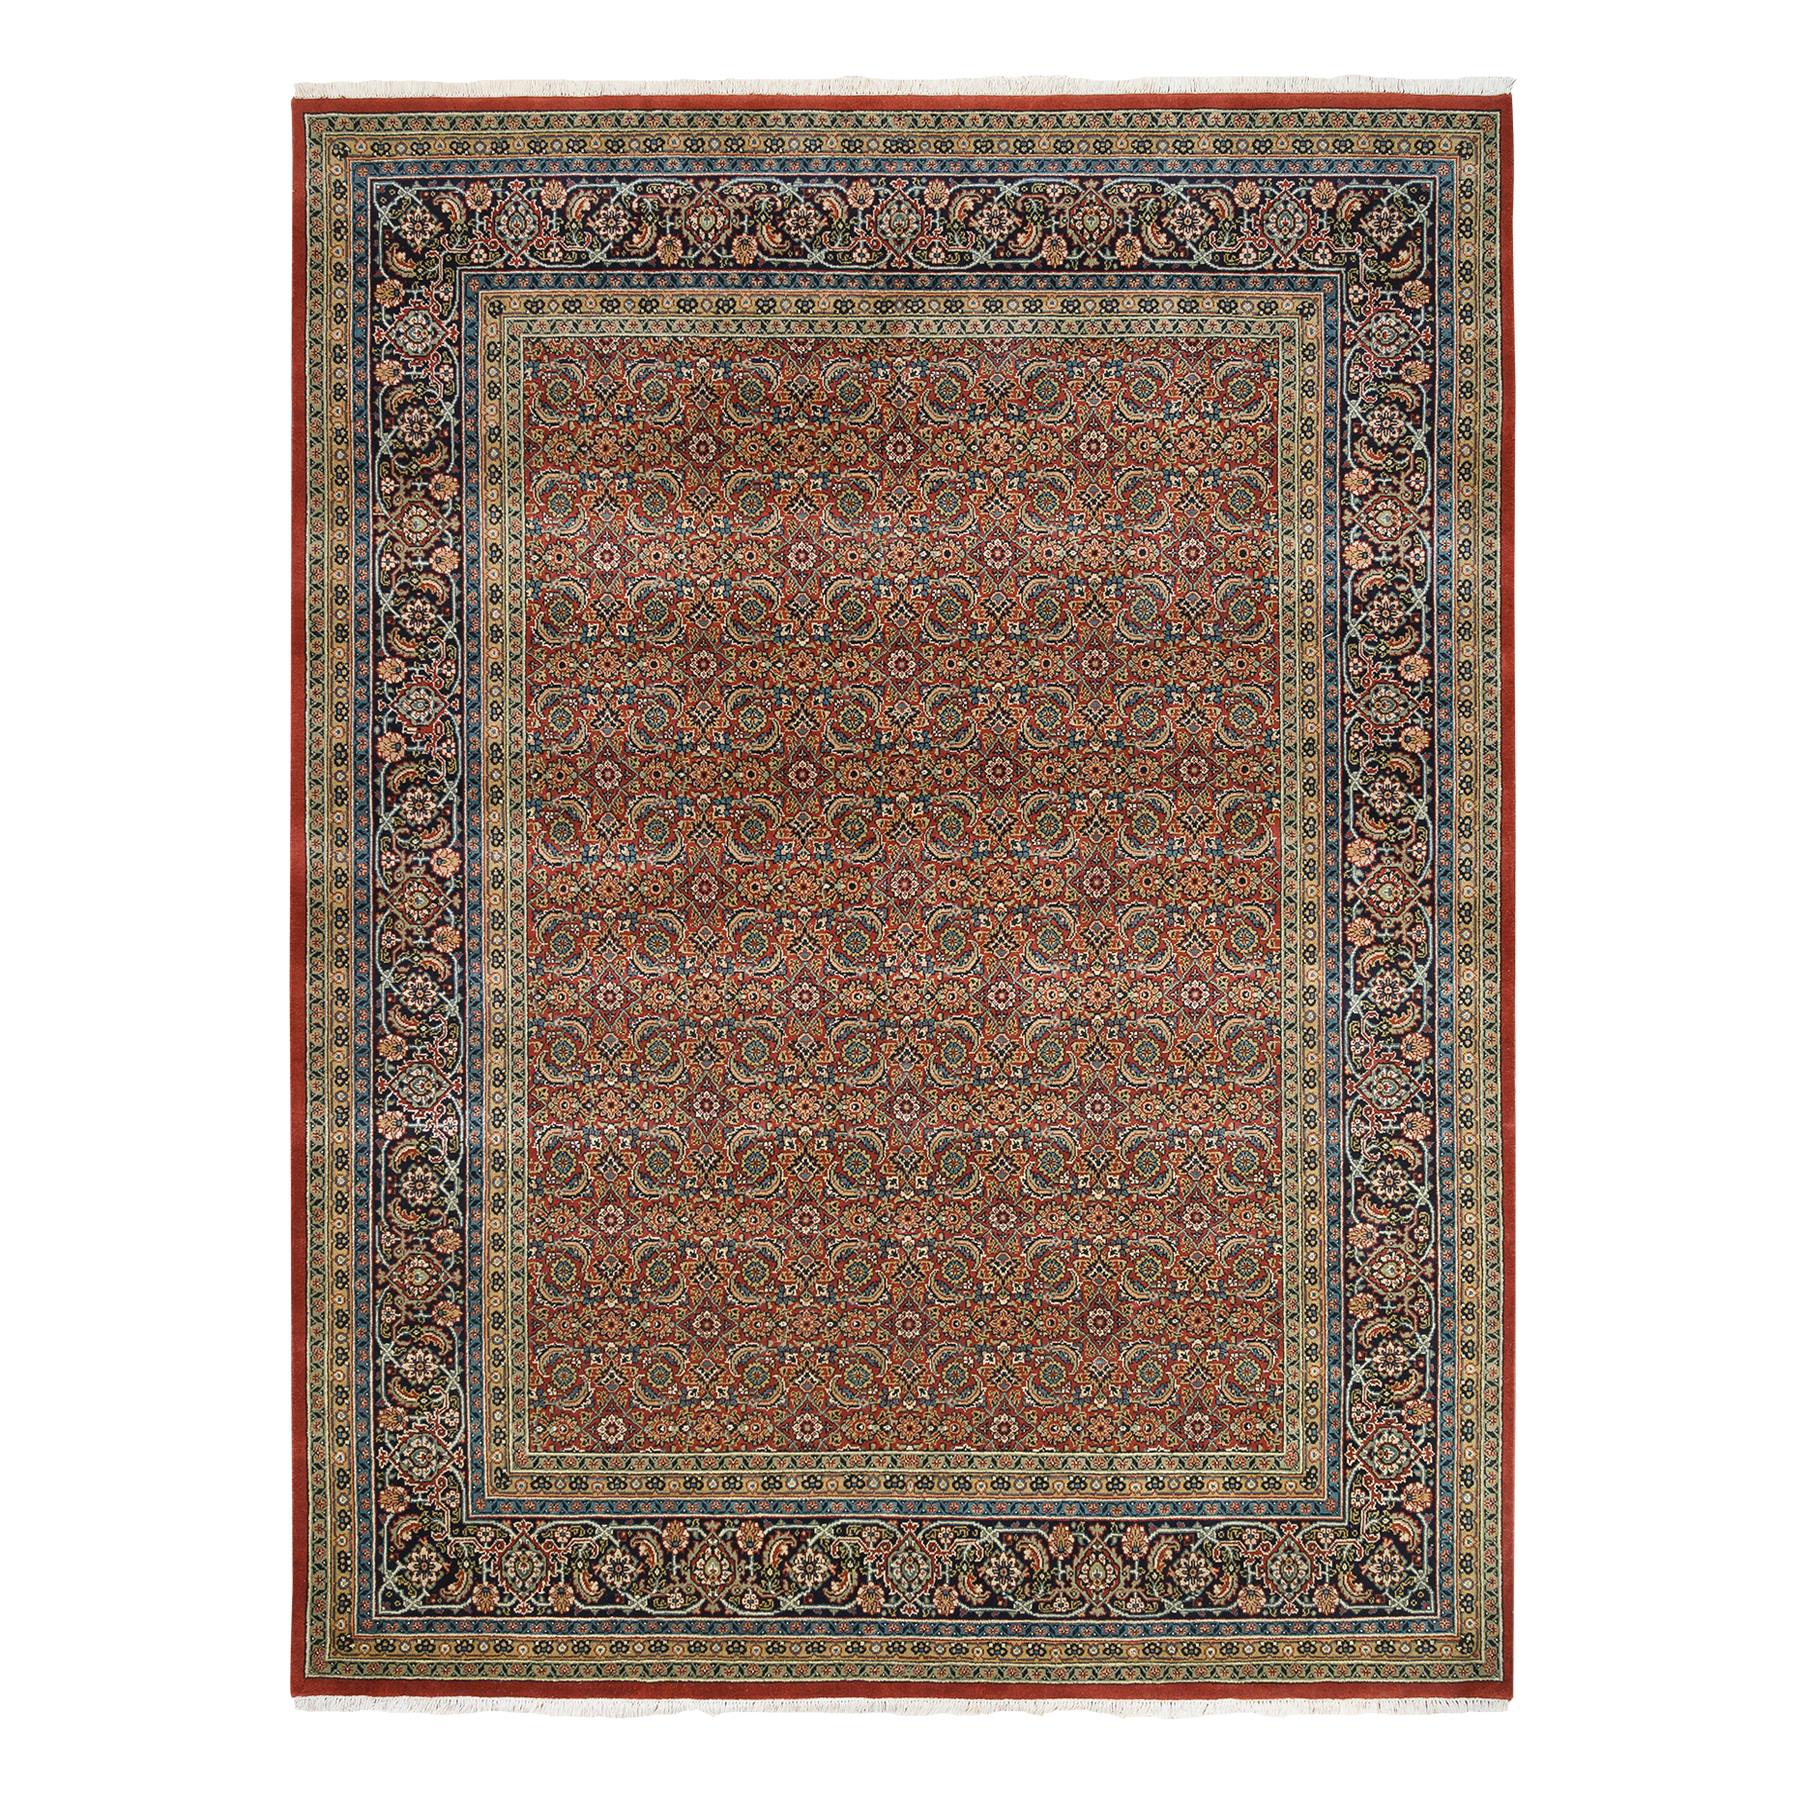 Pirniakan Collection Hand Knotted Red Rug No: 1125974